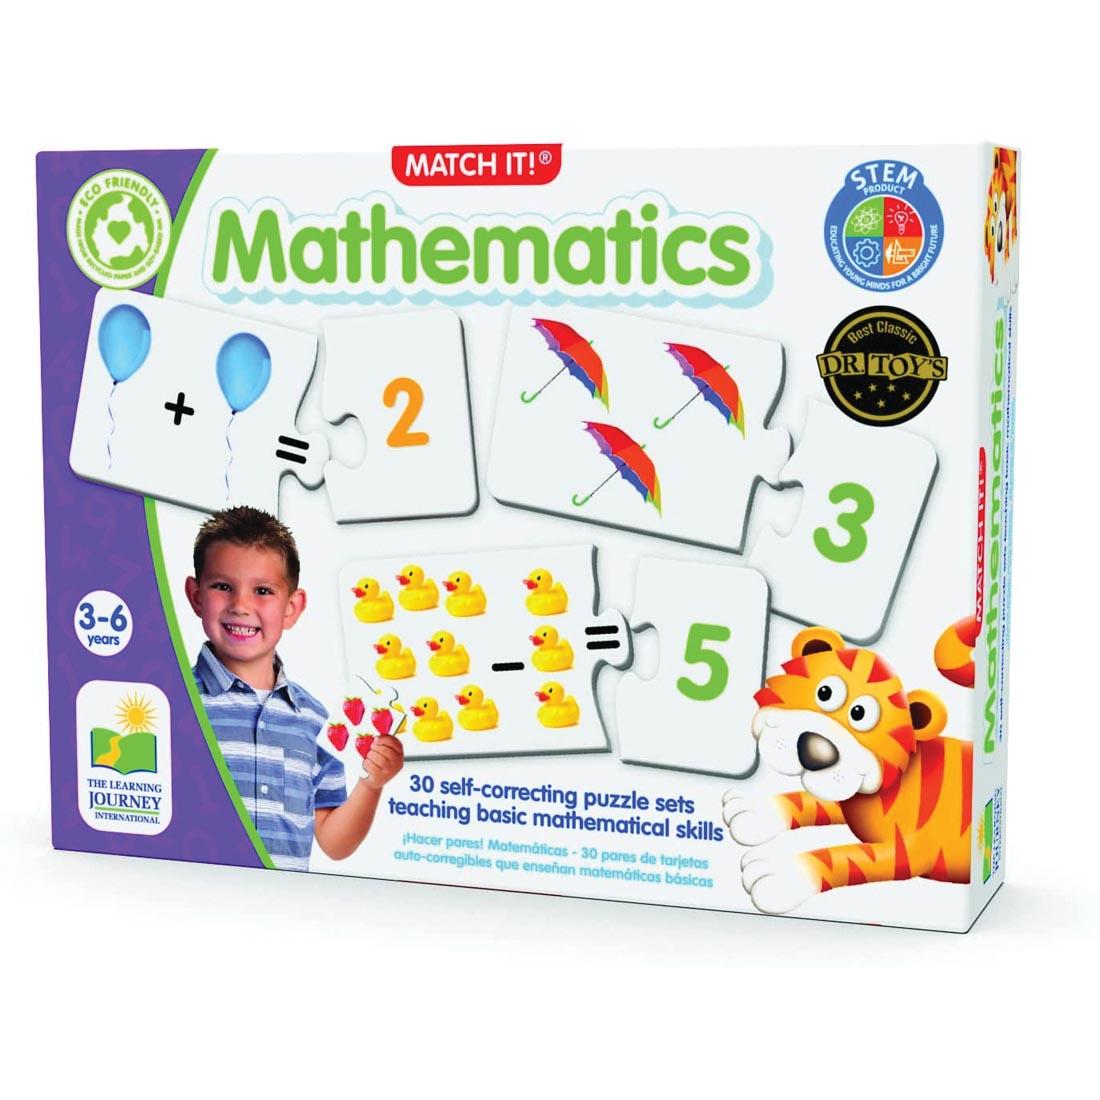 Mathematics Match It! By The Learning Journey